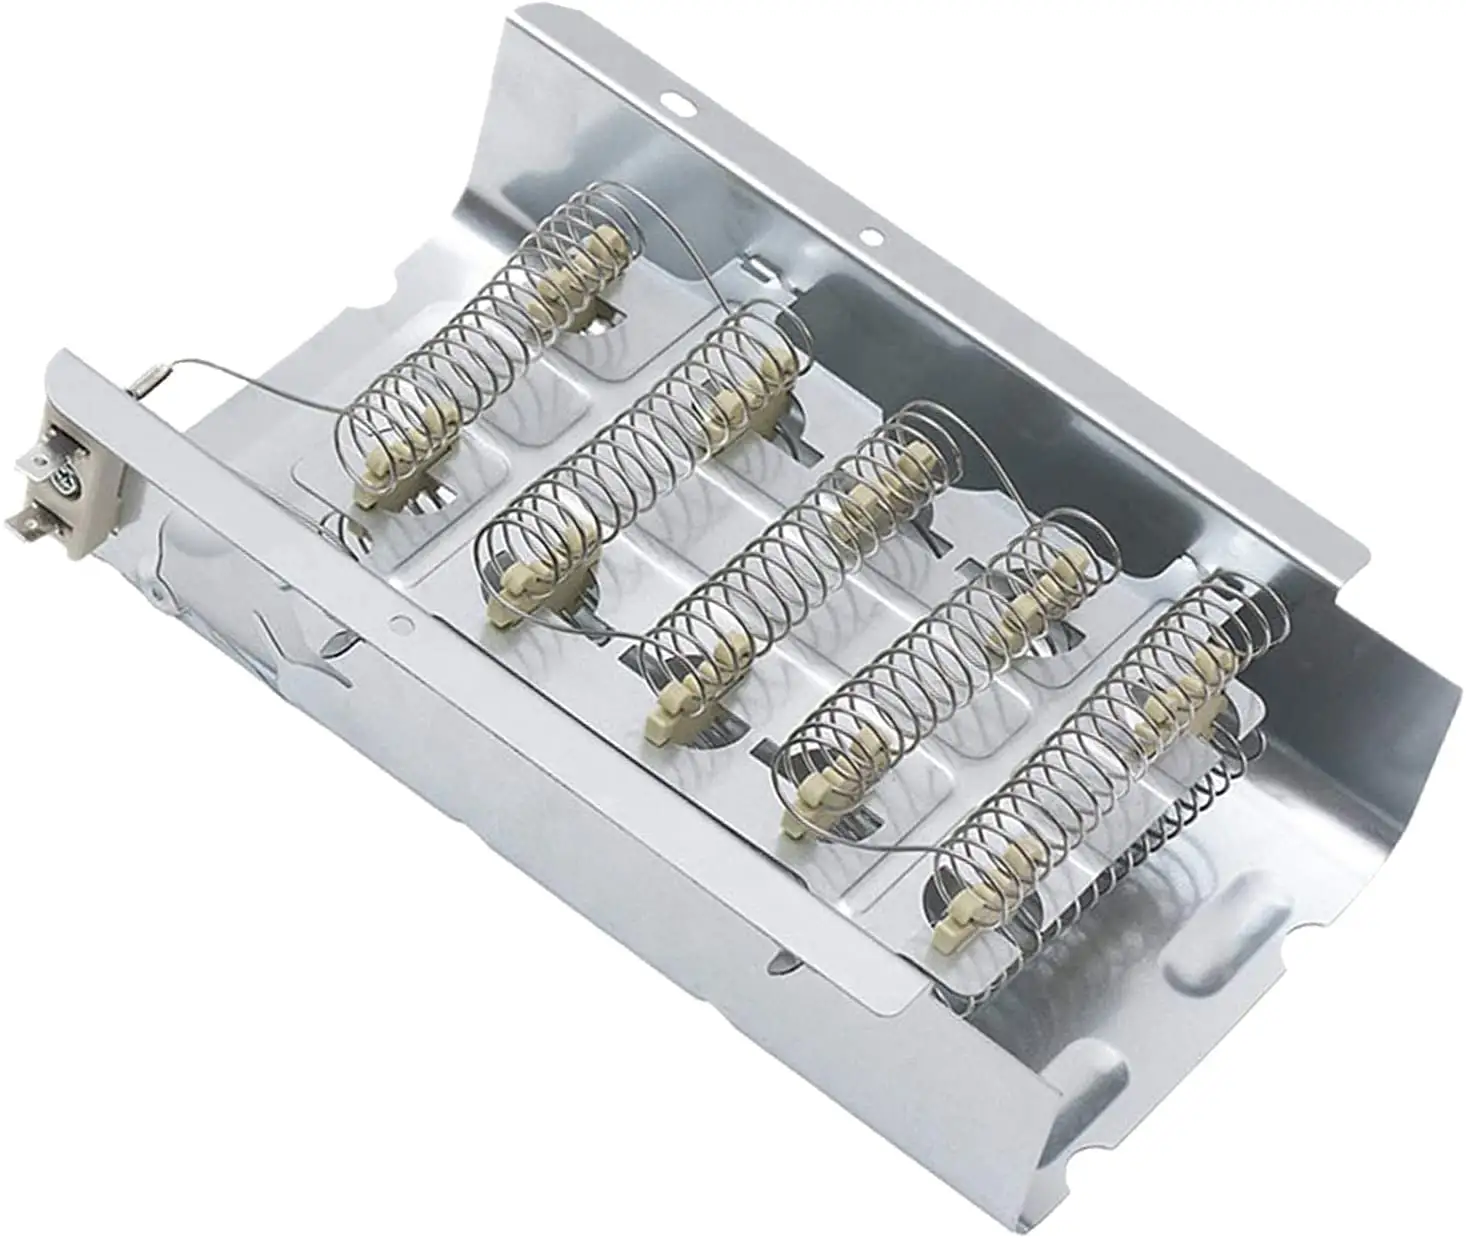 279838 Dryer Heating Element Compatible with Whirlpool Dryers - Replaces AP3094254  279837  2438  279838VP  3398064